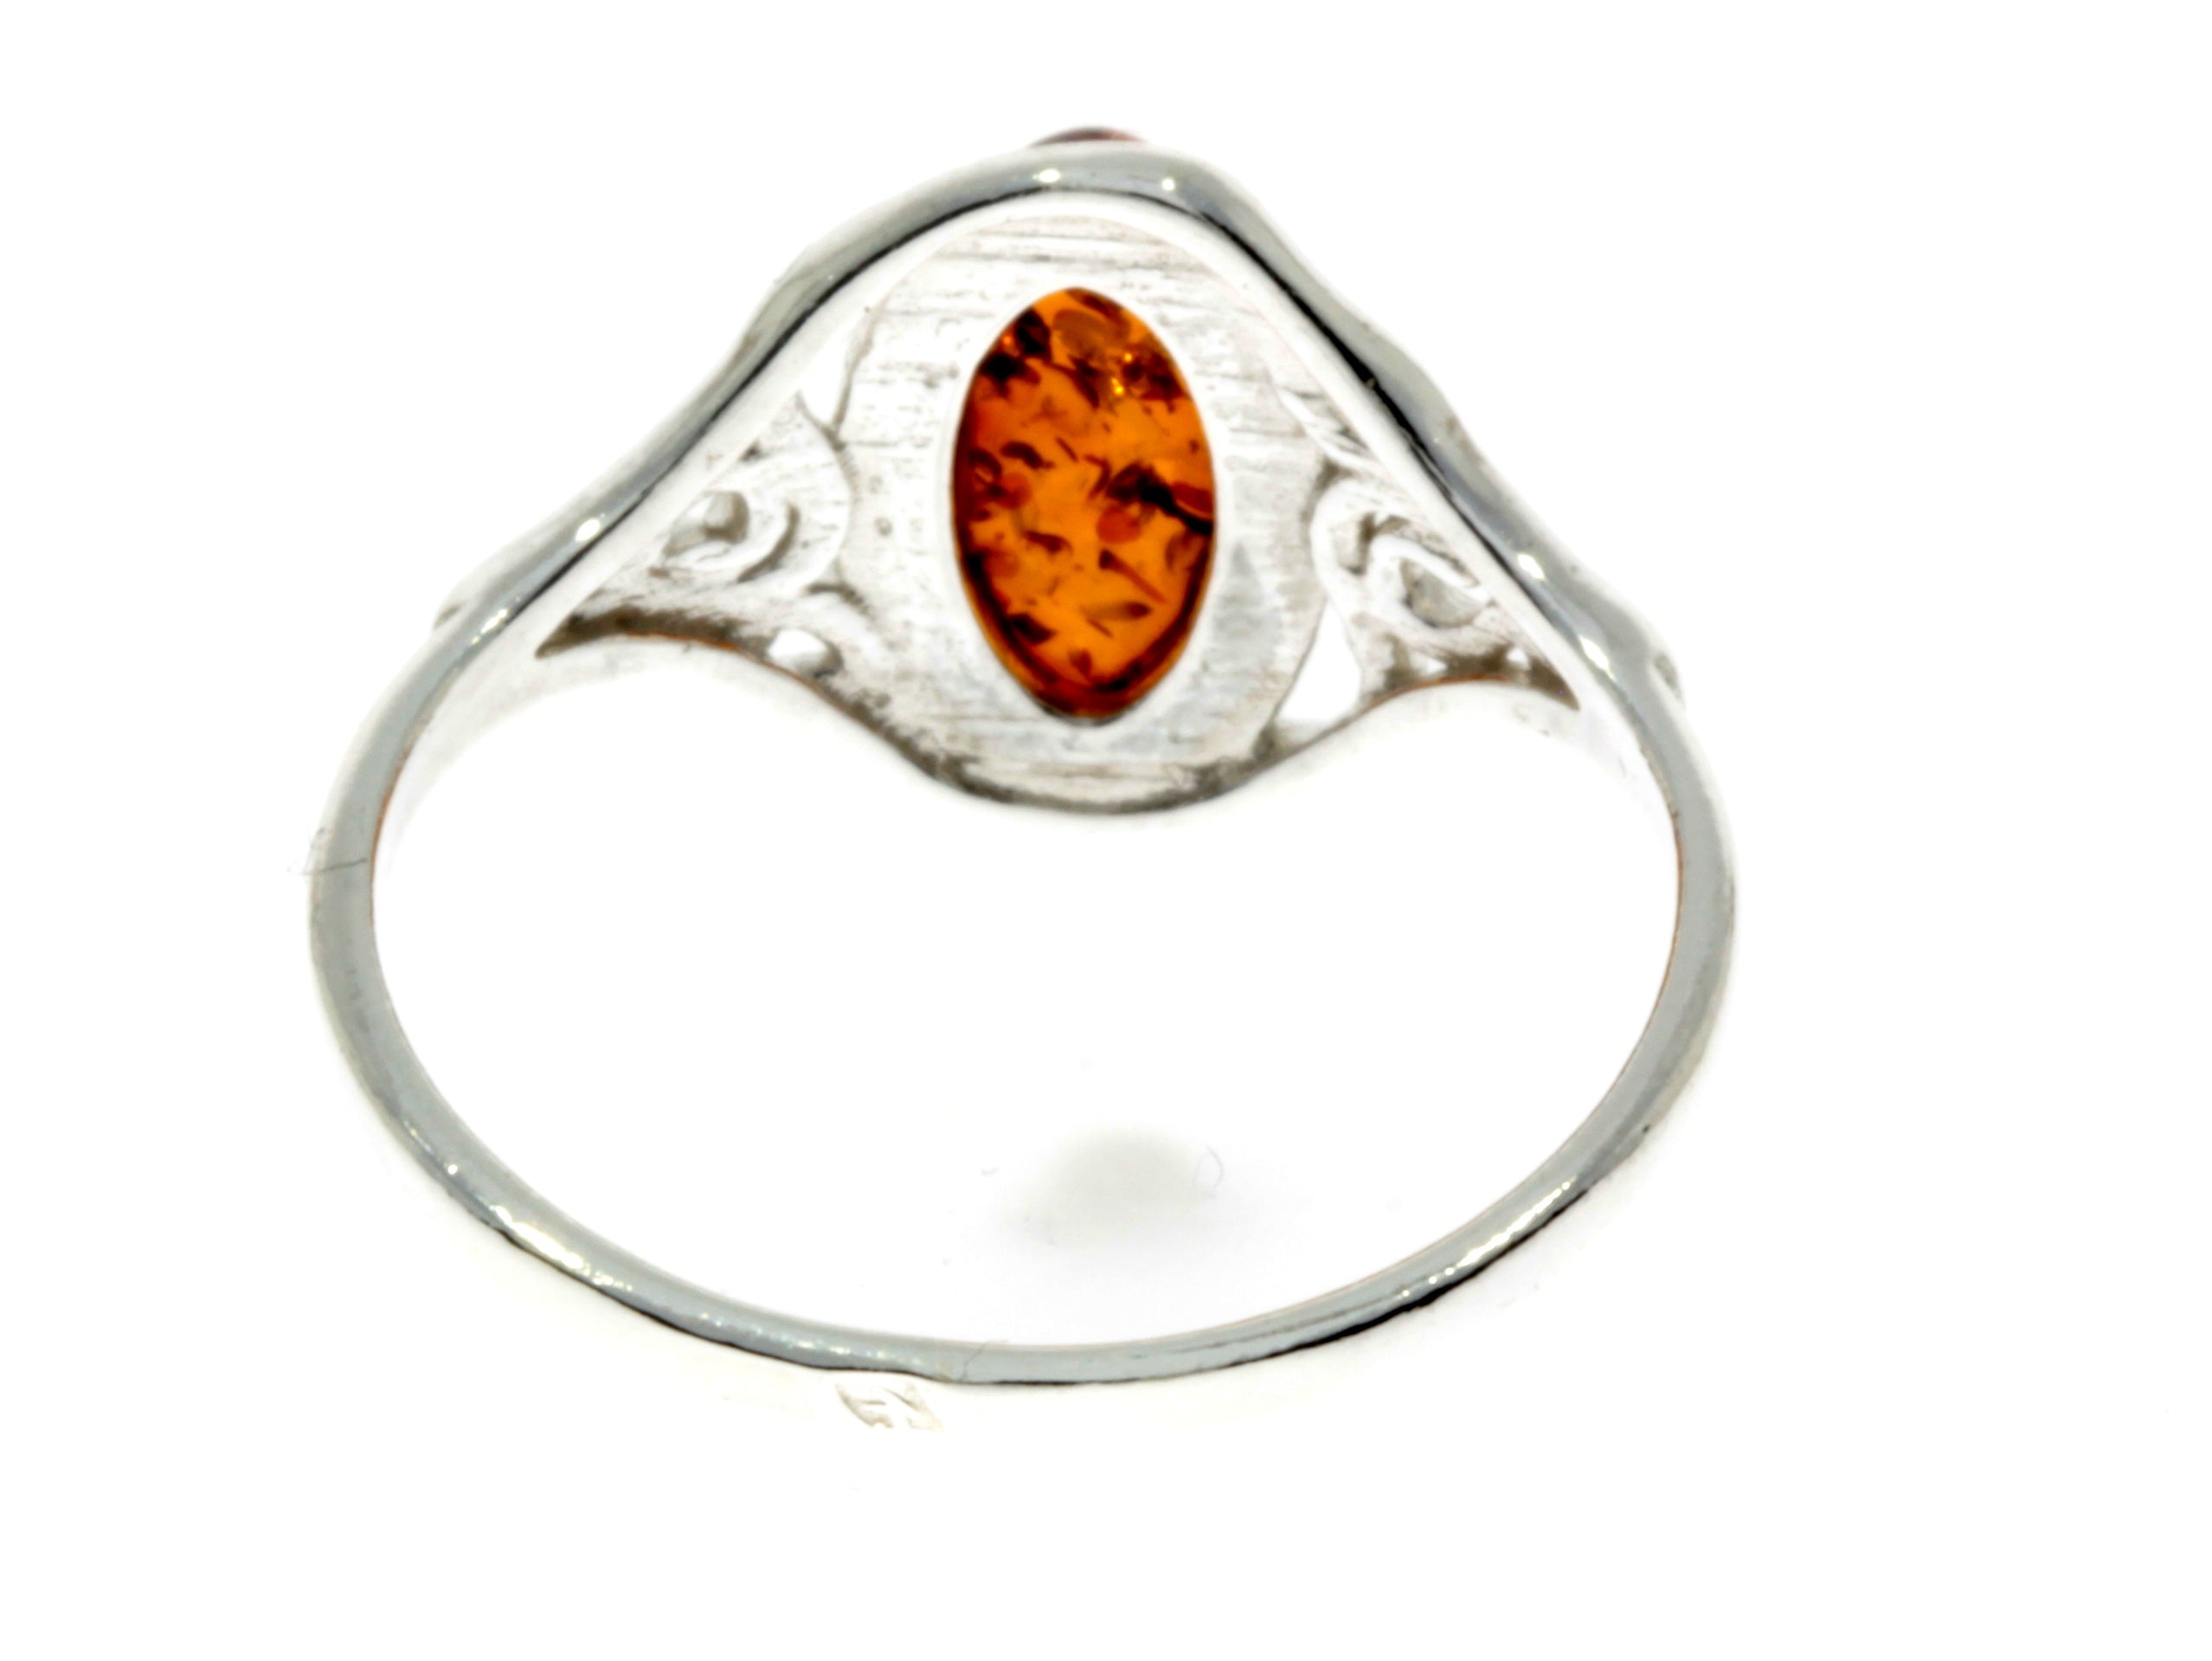 925 Sterling Silver & Oval Baltic Amber Classic Ring - M713